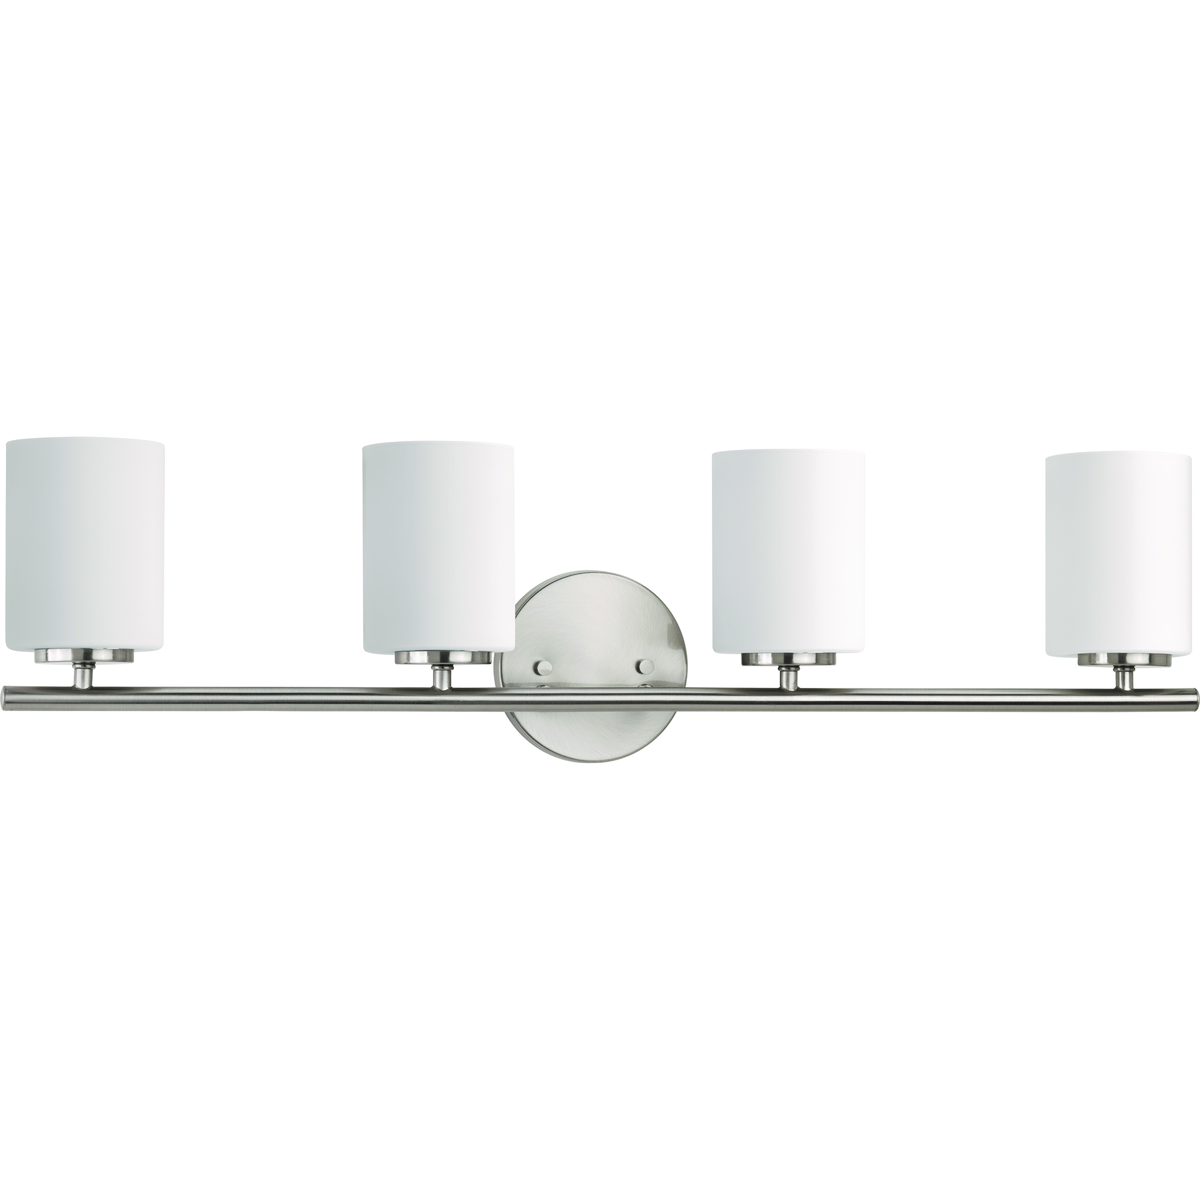 Four-light bath & vanity from the Replay Collection, smooth forms, linear details and a pleasingly elegant frame enhance a simplified modern look. Fixture can be mounted up or down. Brushed Nickel finish.